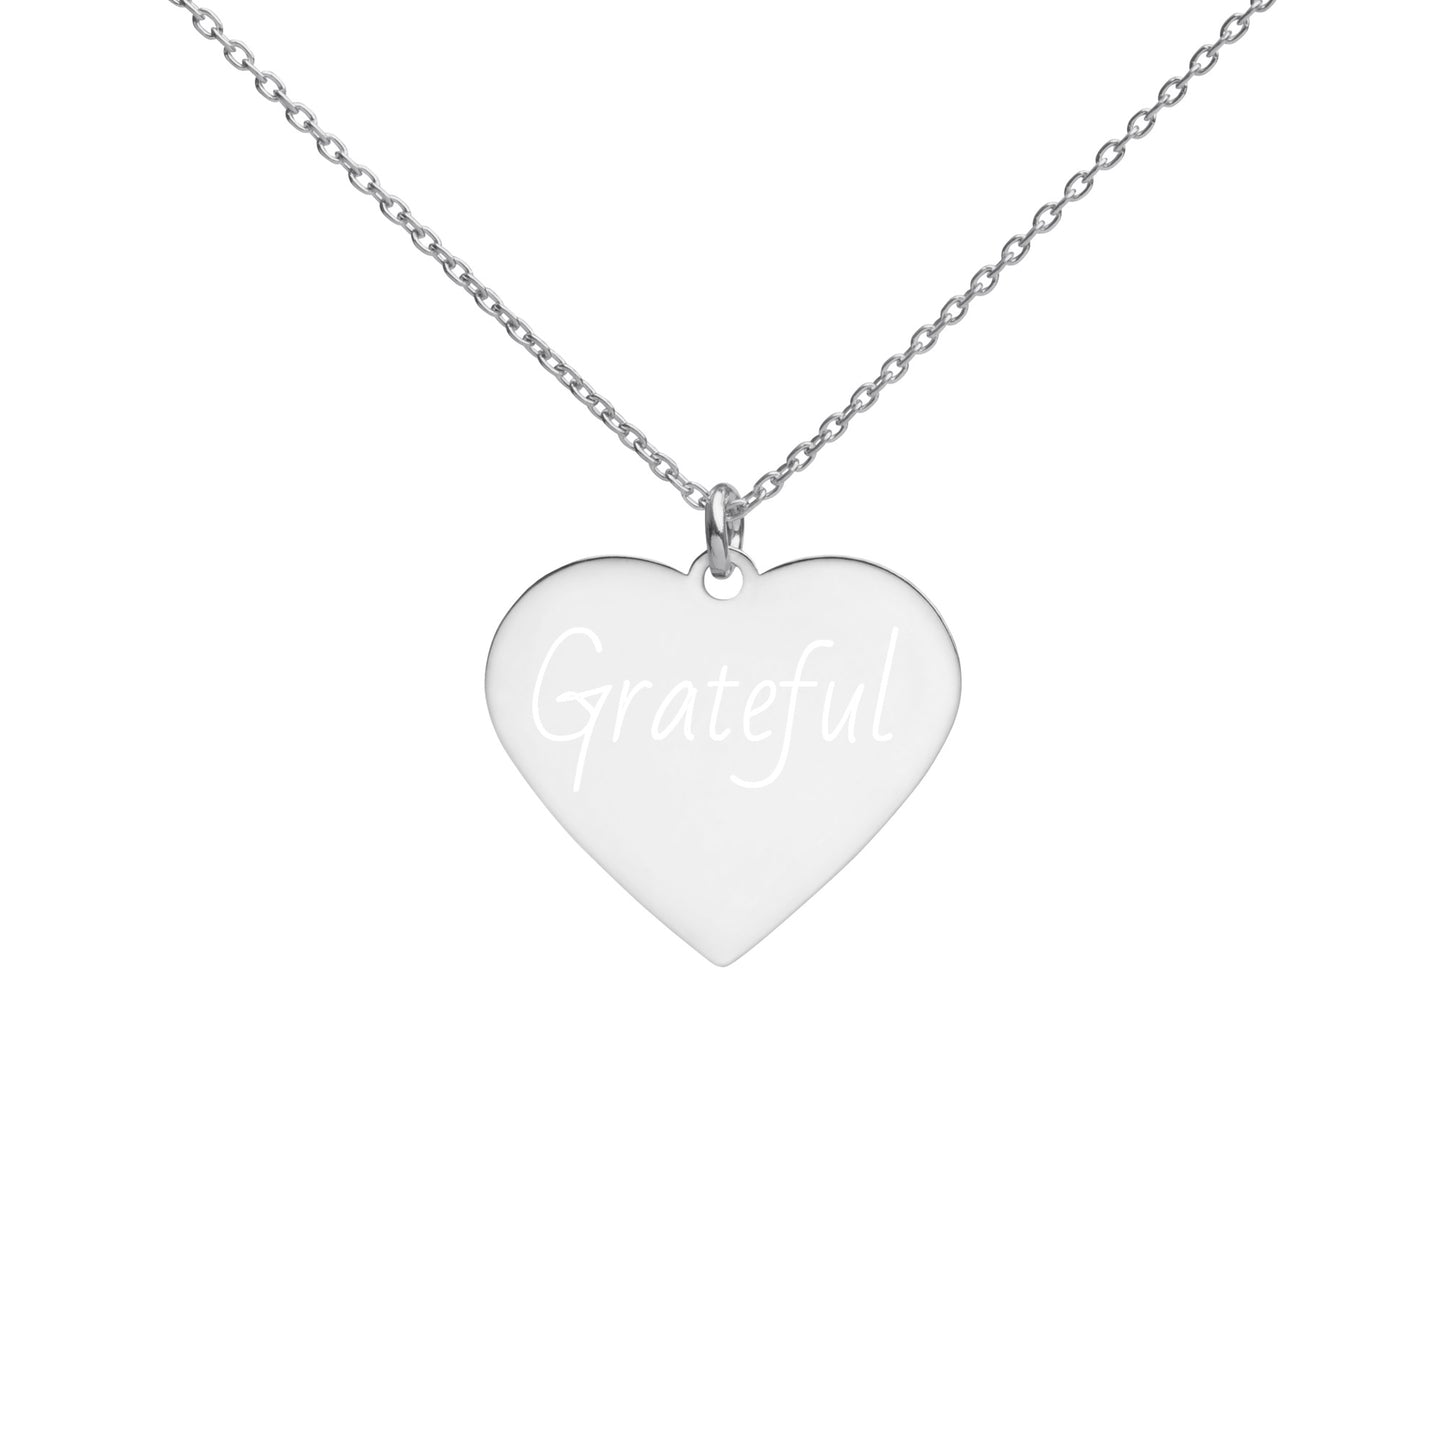 Grateful Heart Engraved Silver Heart Necklace